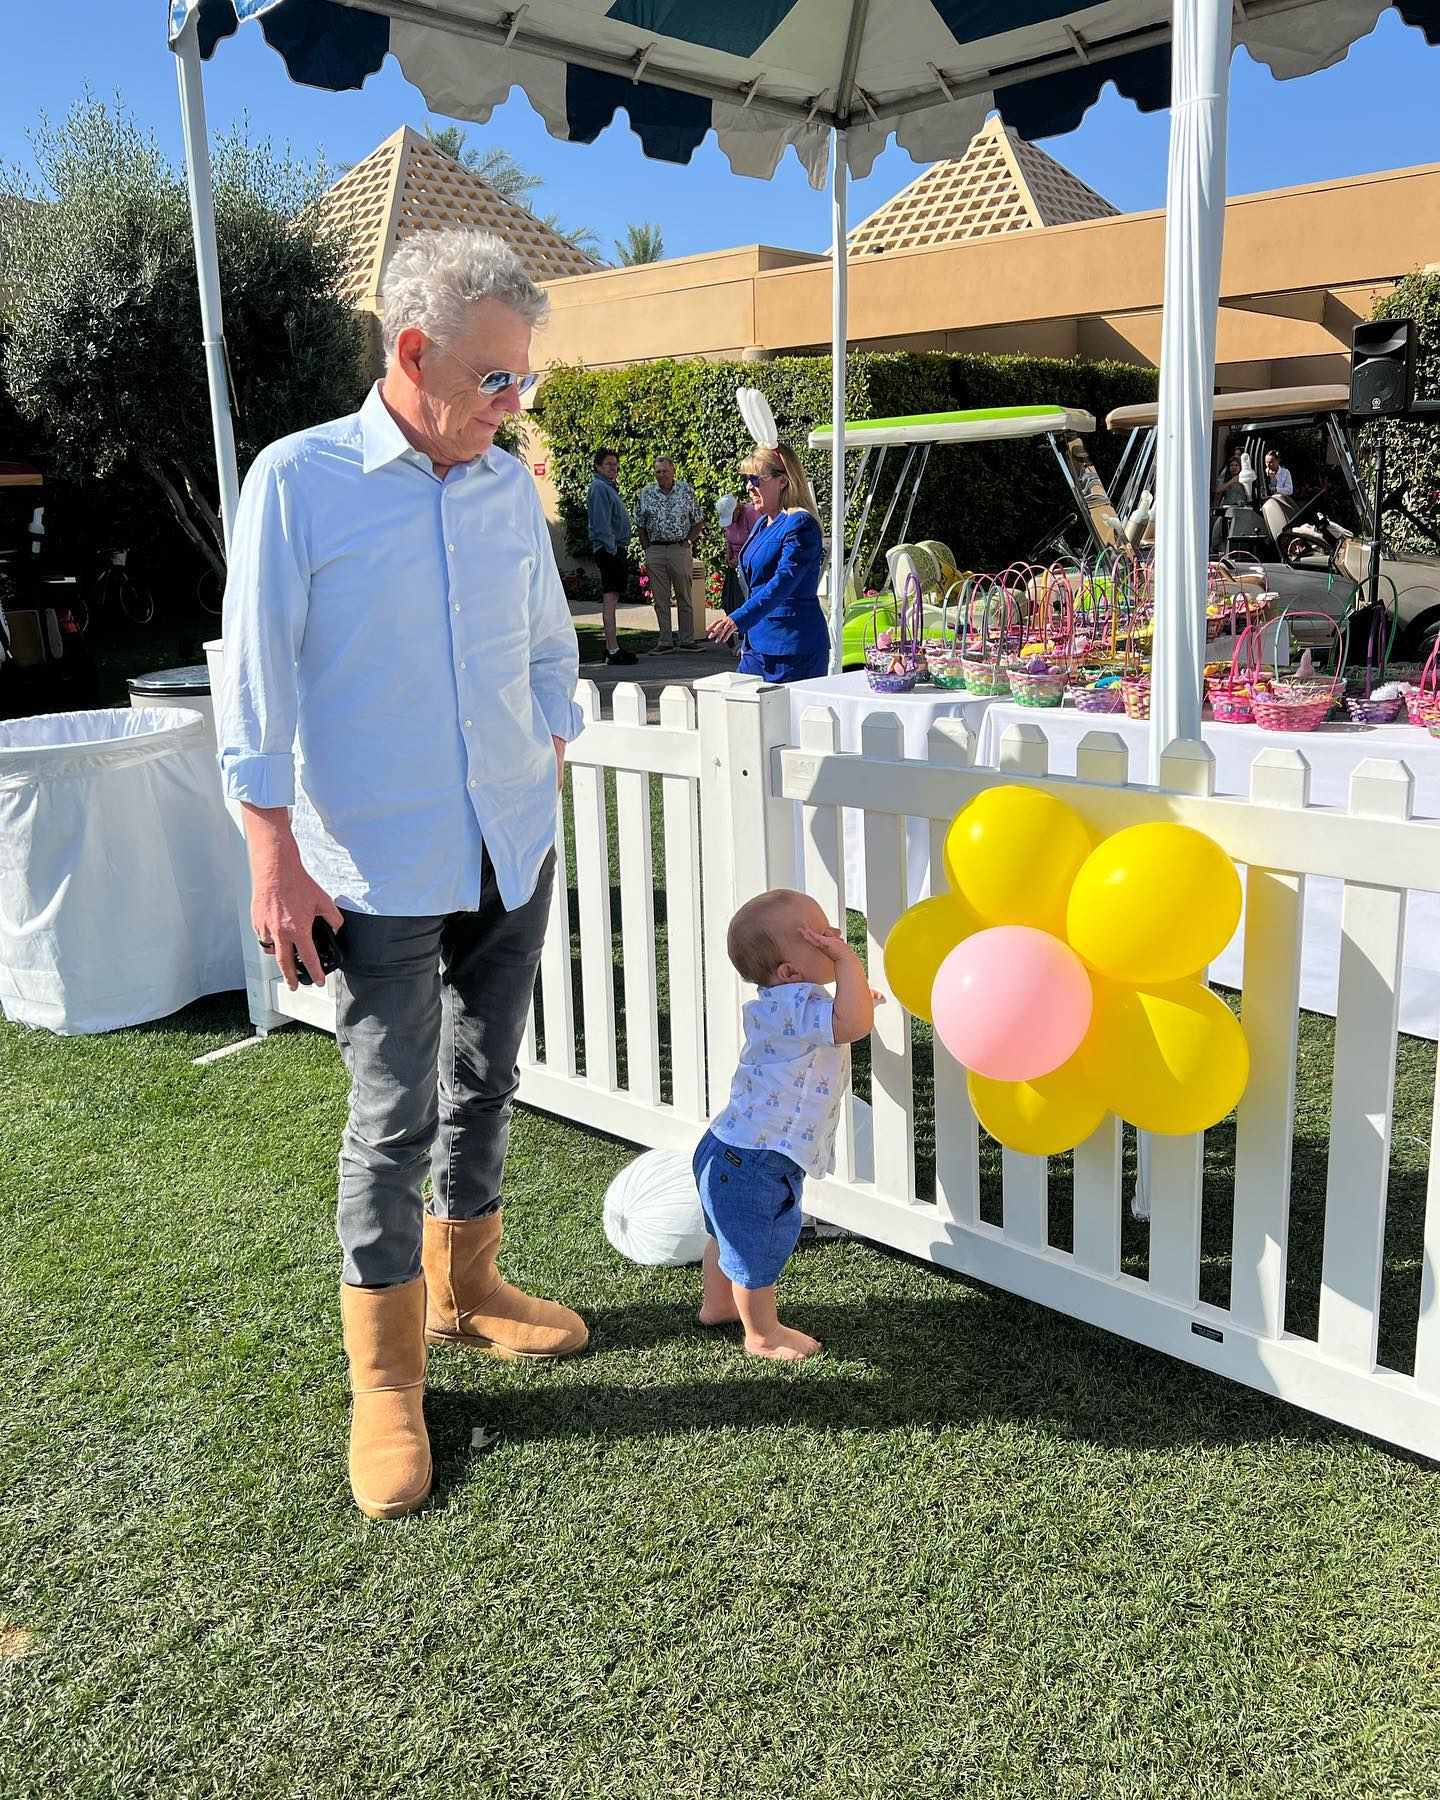 Katharine McPhee Shares Rare Photos of Her and David Foster's Easter With Son Rennie 7